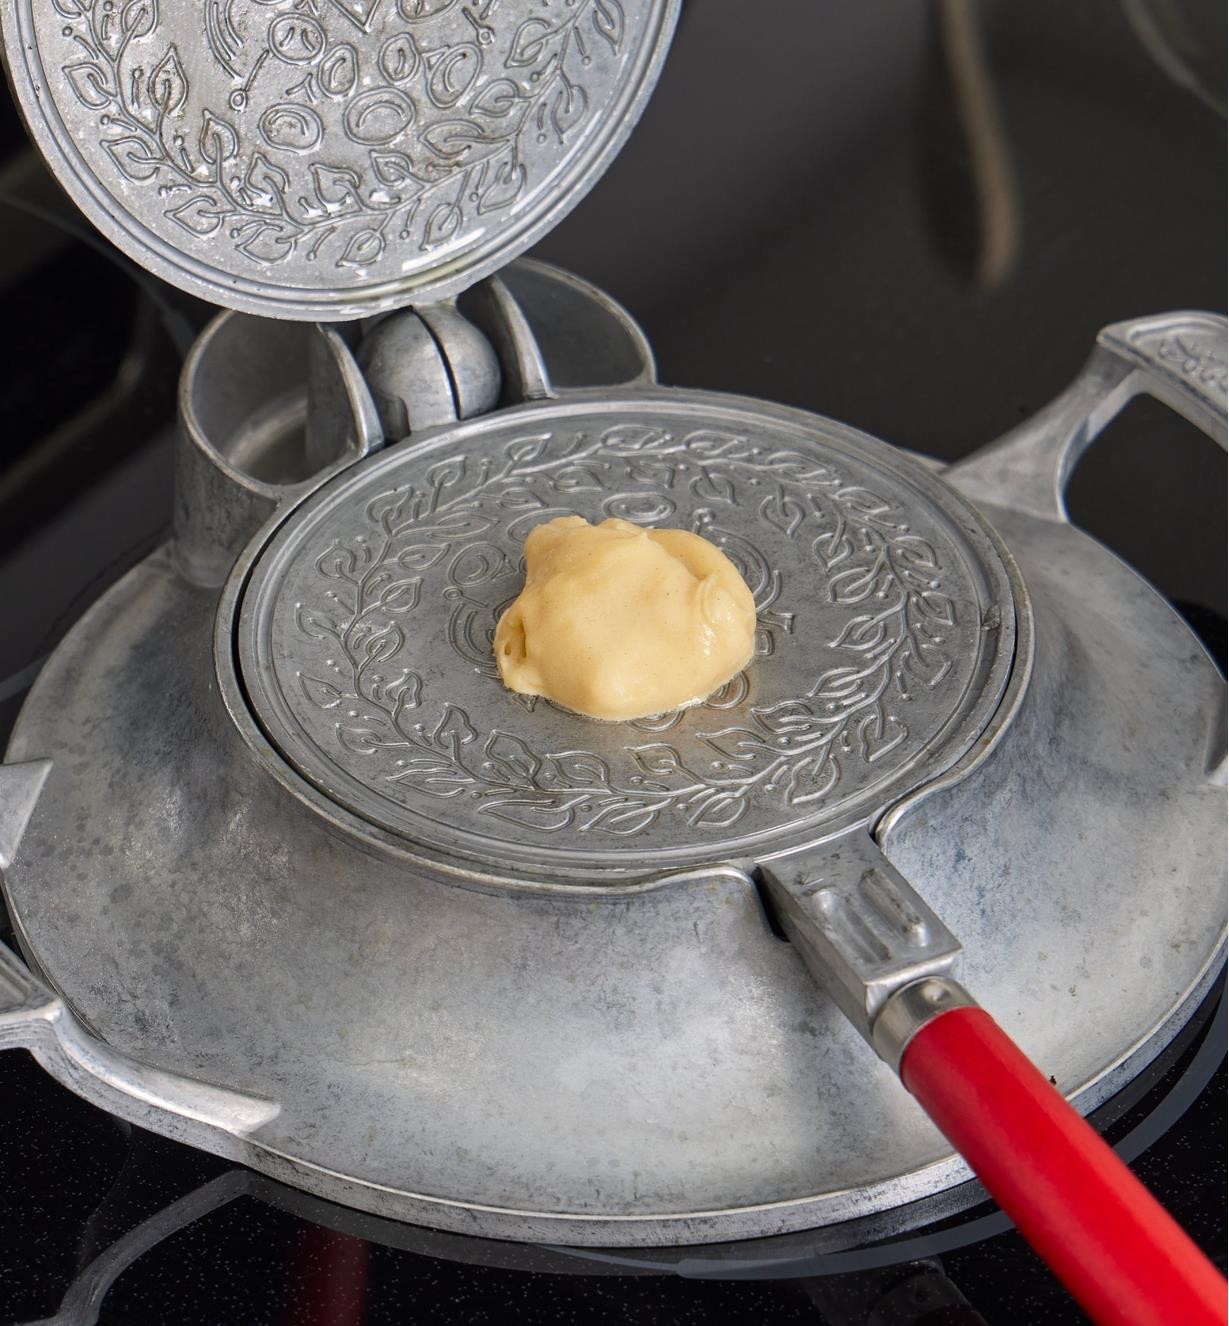 A small amount of batter placed in the center of the griddle plate of the krumkake and pizzelle iron